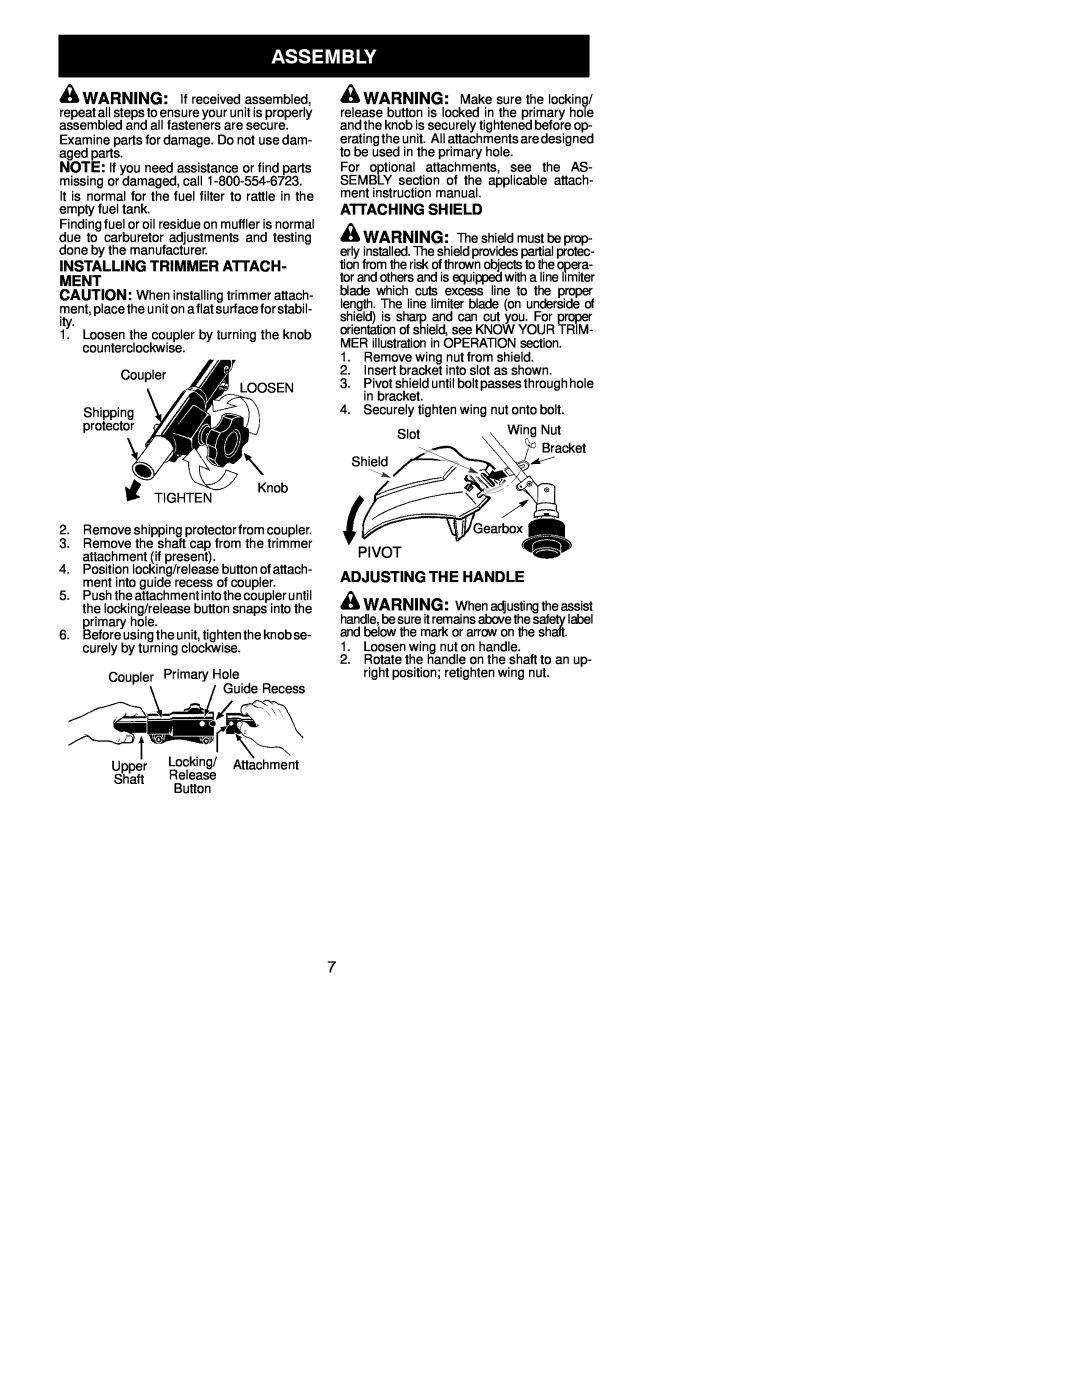 Poulan 530164077 instruction manual Installing Trimmer Attach- Ment, Attaching Shield, Pivot, Adjusting The Handle 